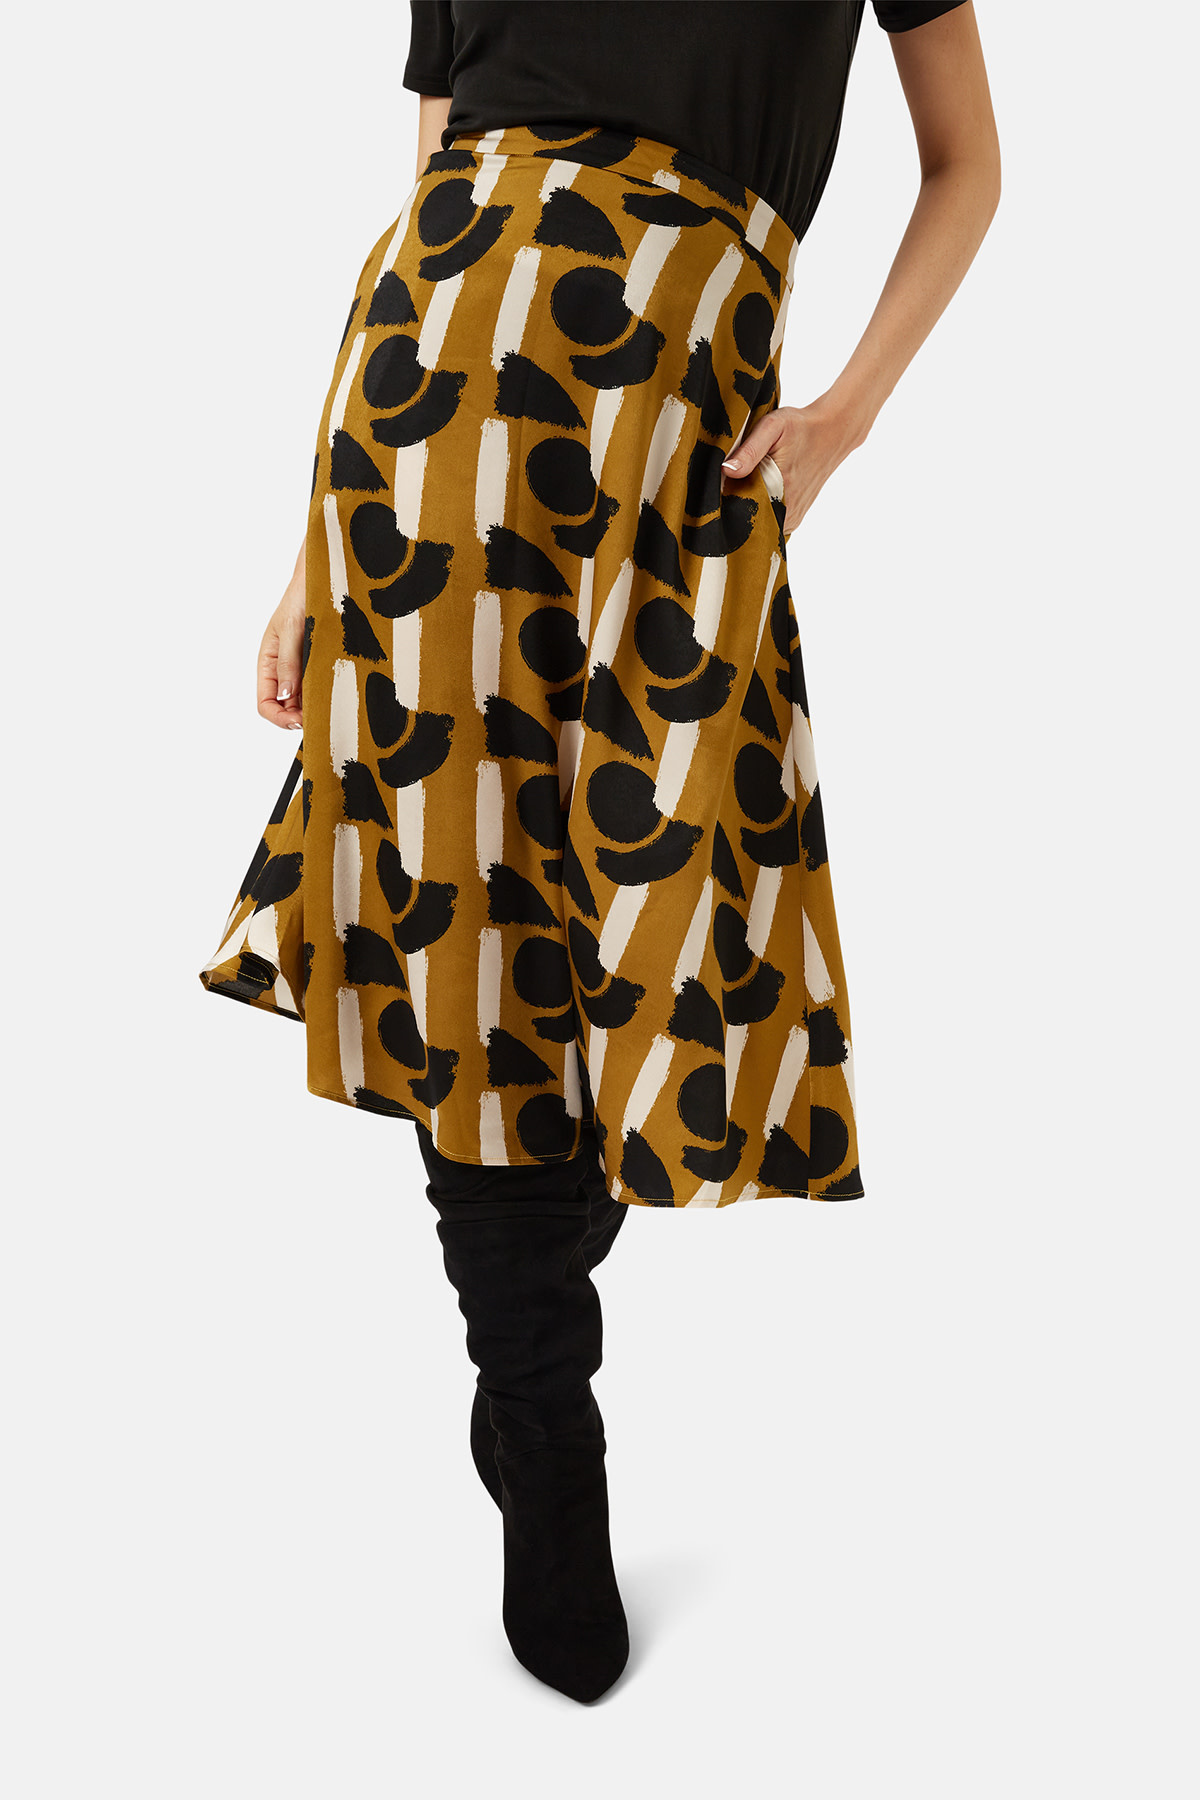 Traffic People Bold Abstract Print Skirt